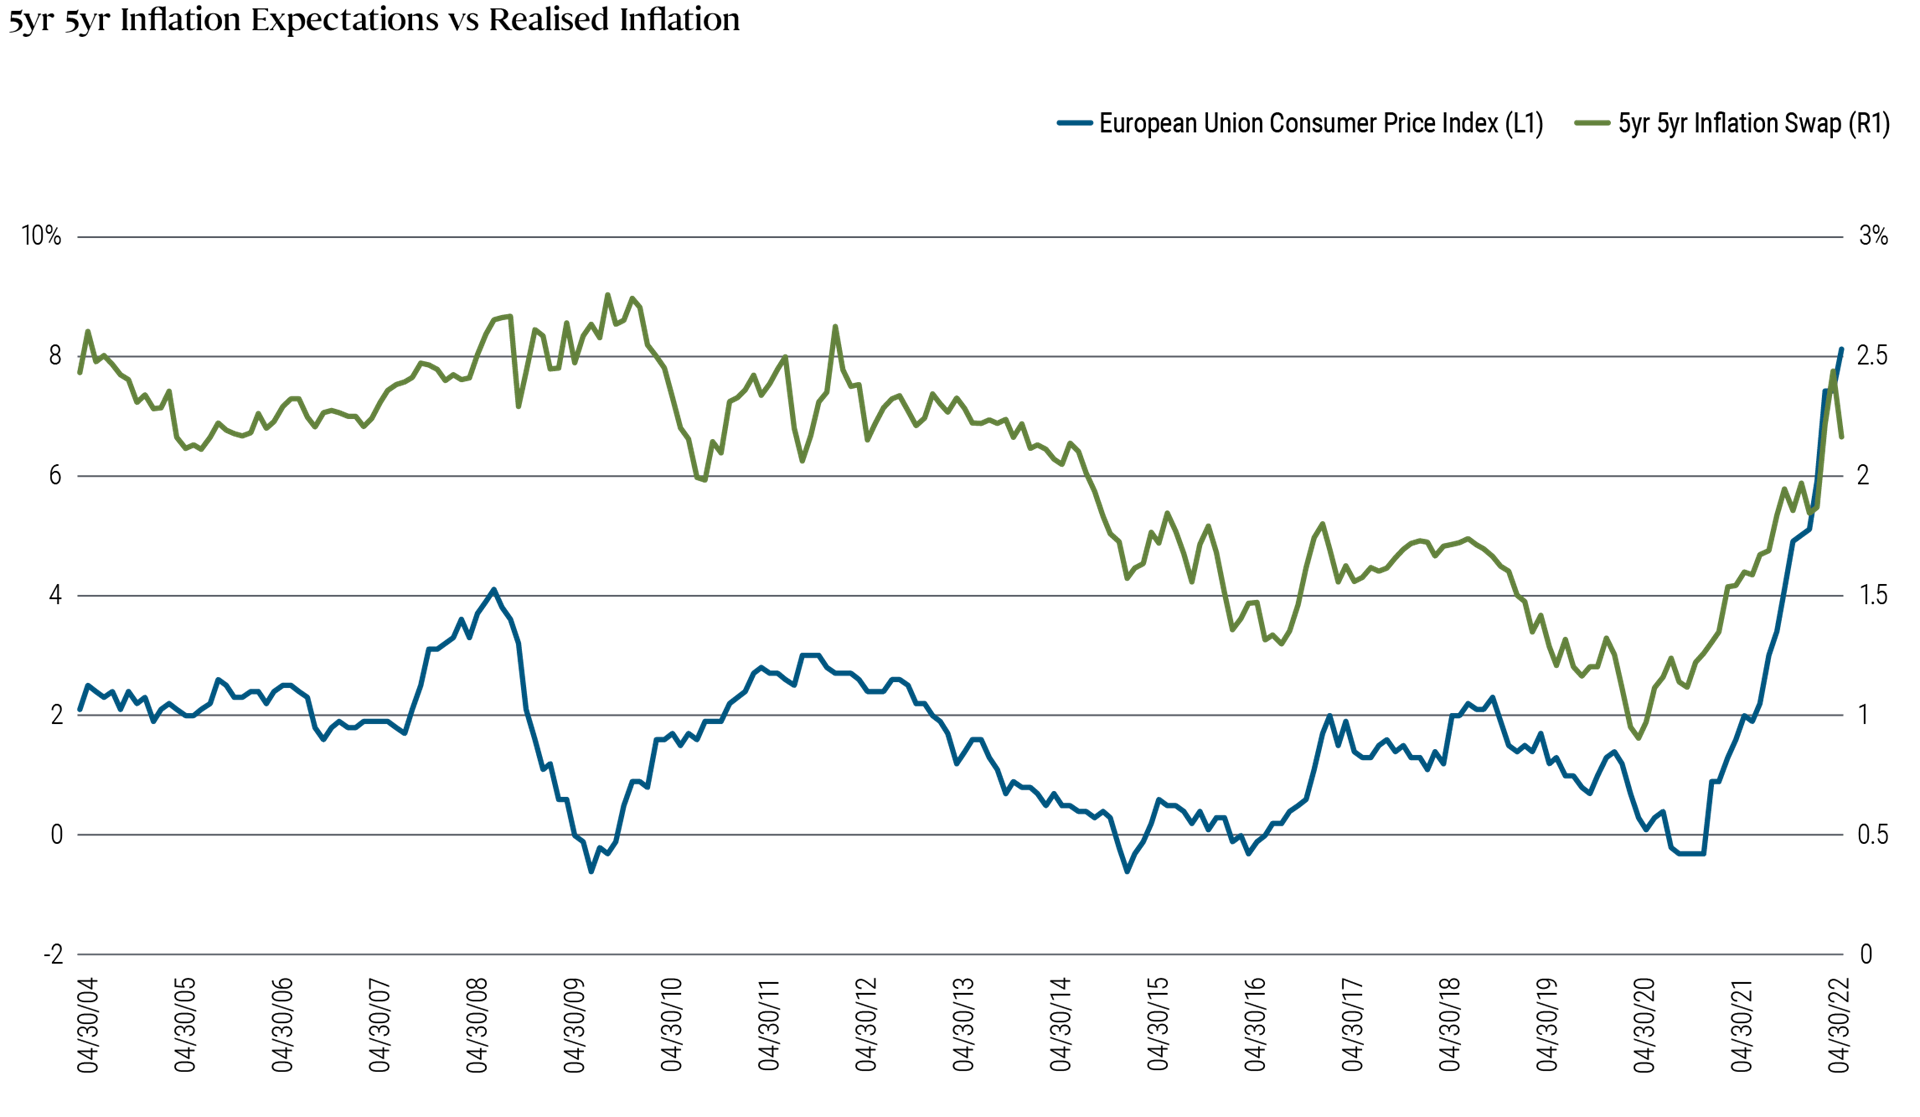 This chart shows the European 5-year, 5-year inflation swaps, which indicates that investors expect inflation will be just 2.2% over the 5-year period from 31 May 2027 to 31 May 2032. It also shows European inflation, as measured by the European Consumer Price Index, currently at 8.1%. 